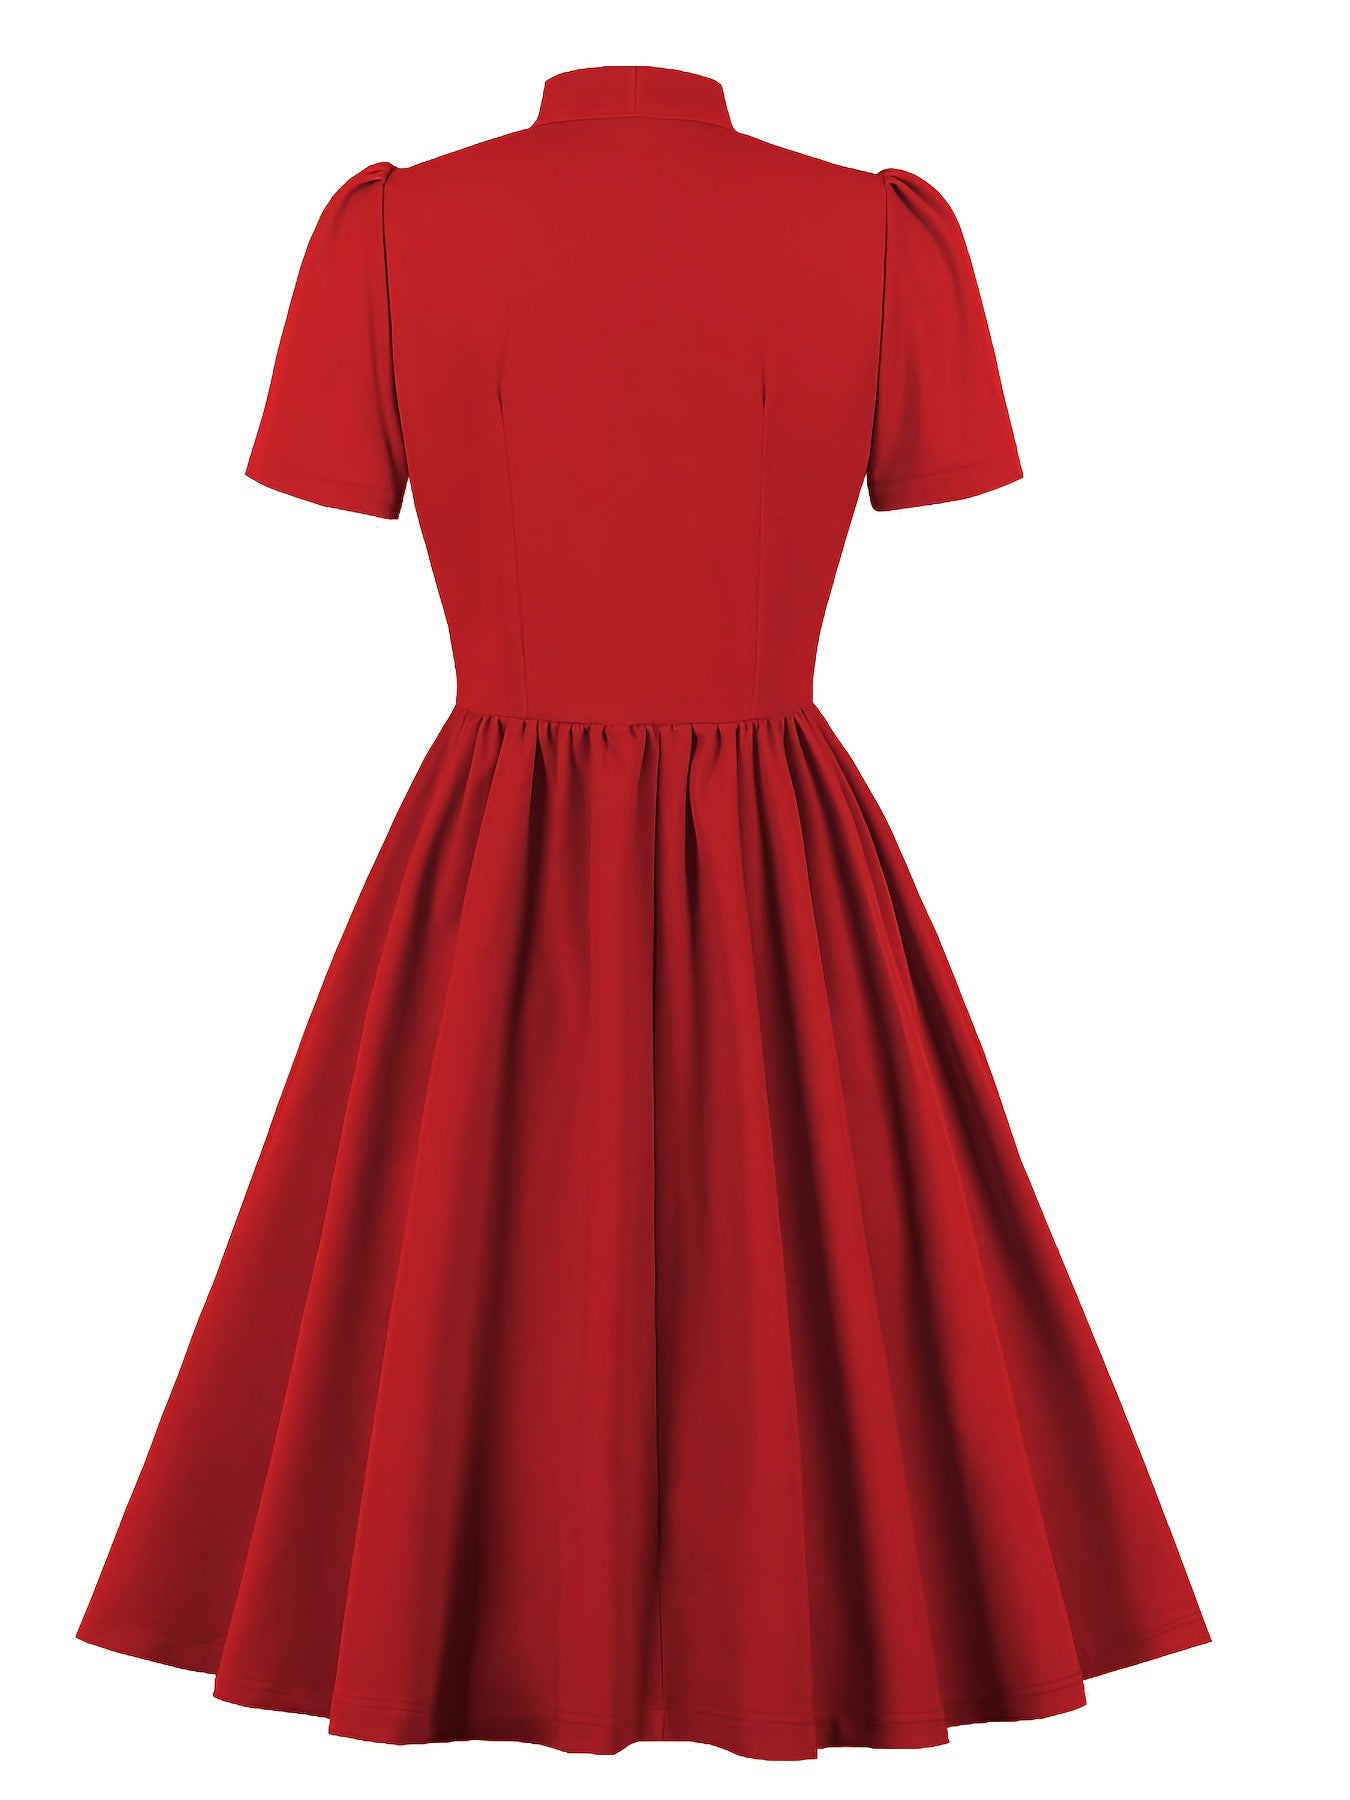 Classy Vintage A Line Women Dresses with Neck Bow